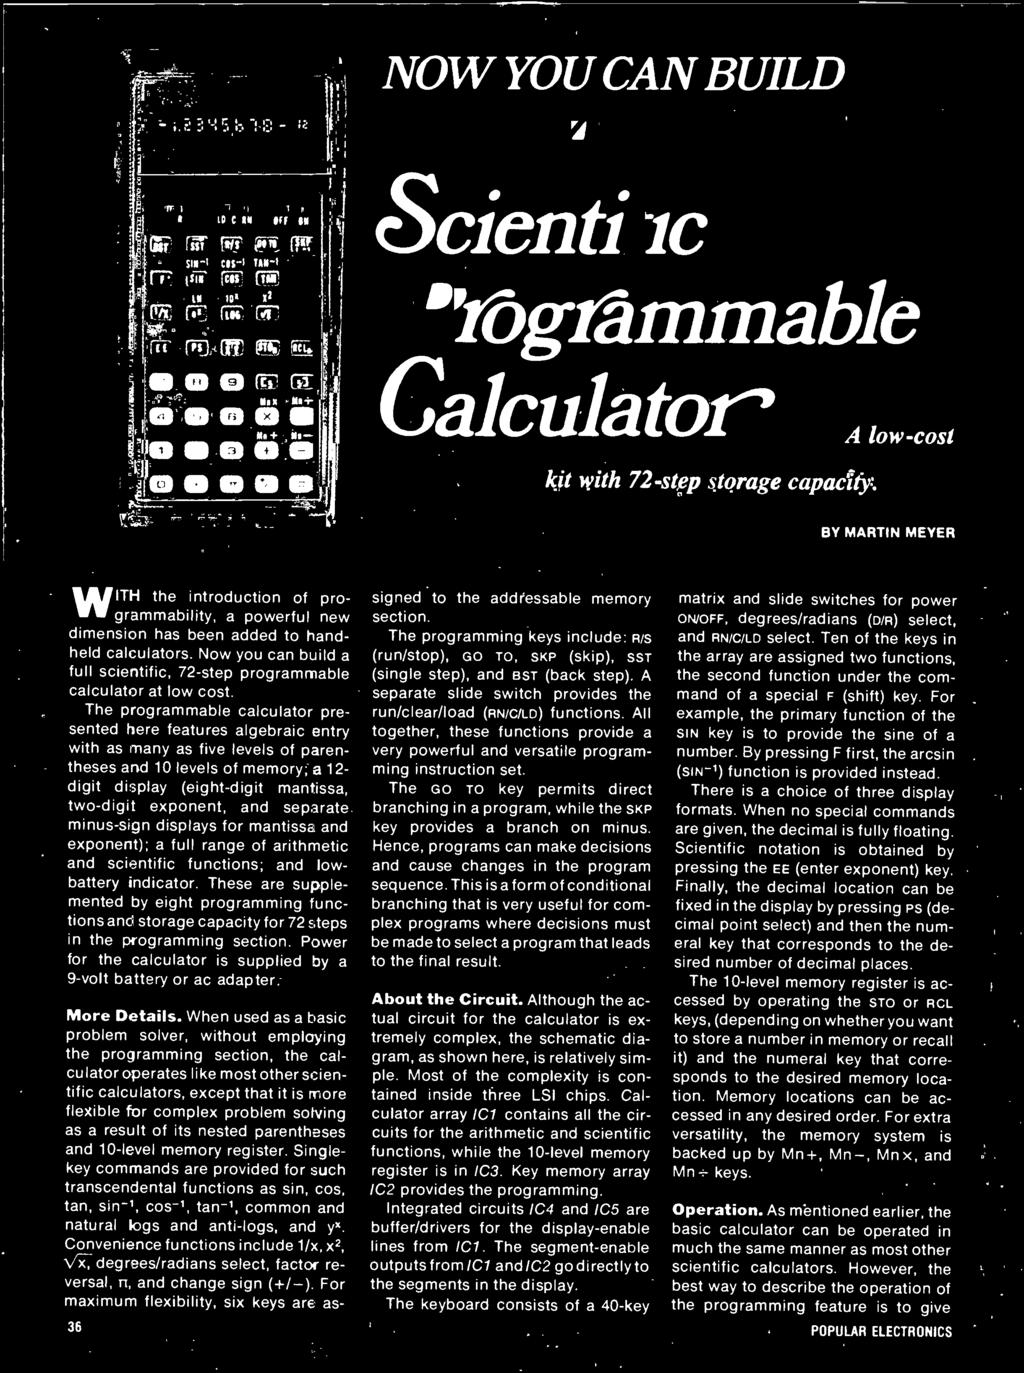 Now you can build a full scientific, 72 -step programmable calculator at low cost. The programmable calculator presented here features algebraic entry with as many as five levels of parentheses.